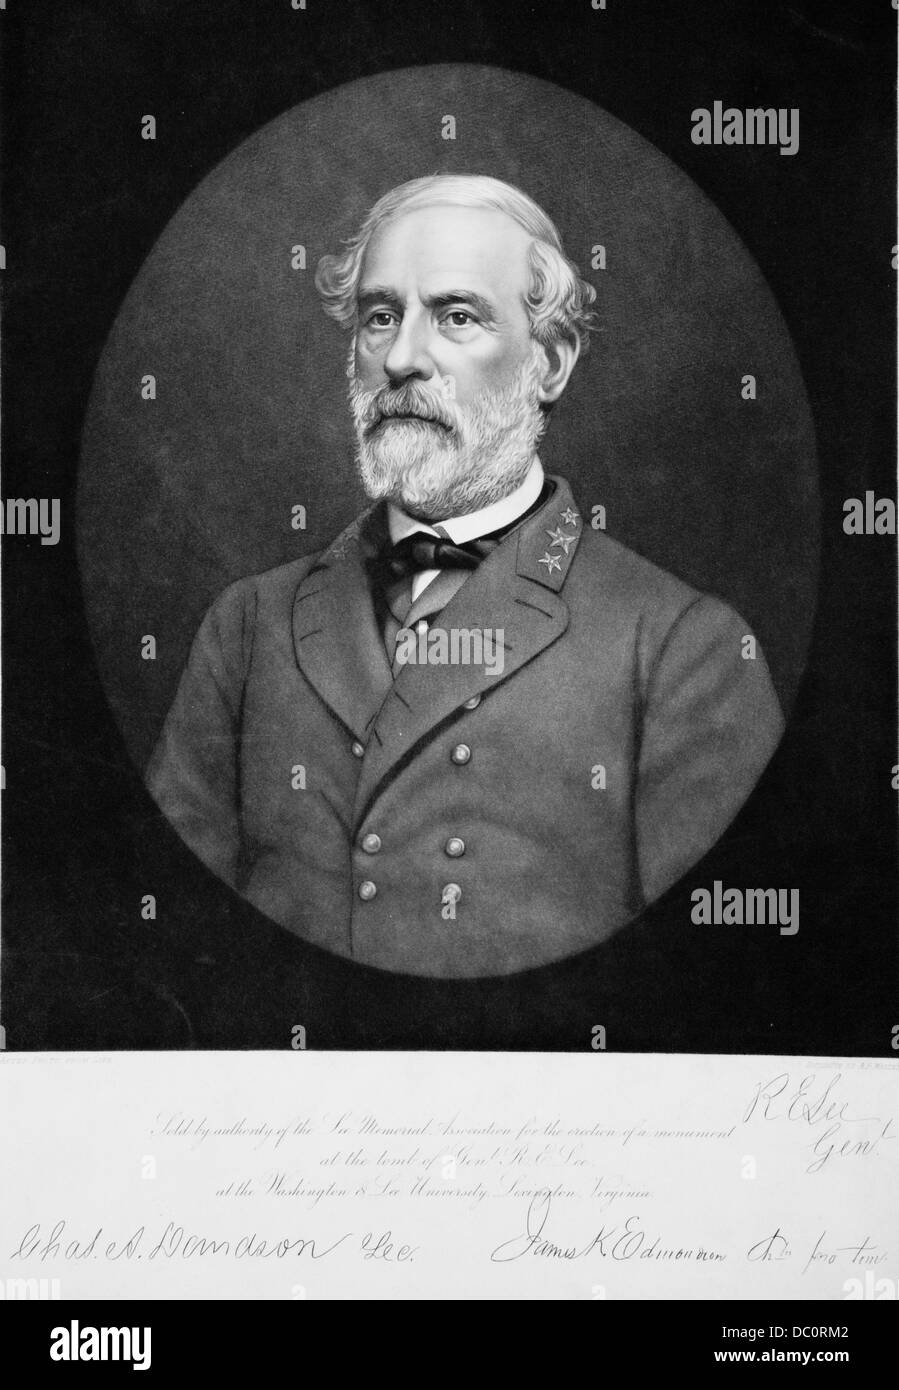 1800s 1860s PORTRAIT OF ROBERT E LEE GENERAL OF CONFEDERATE ARMY DURING AMERICAN CIVIL WAR Stock Photo